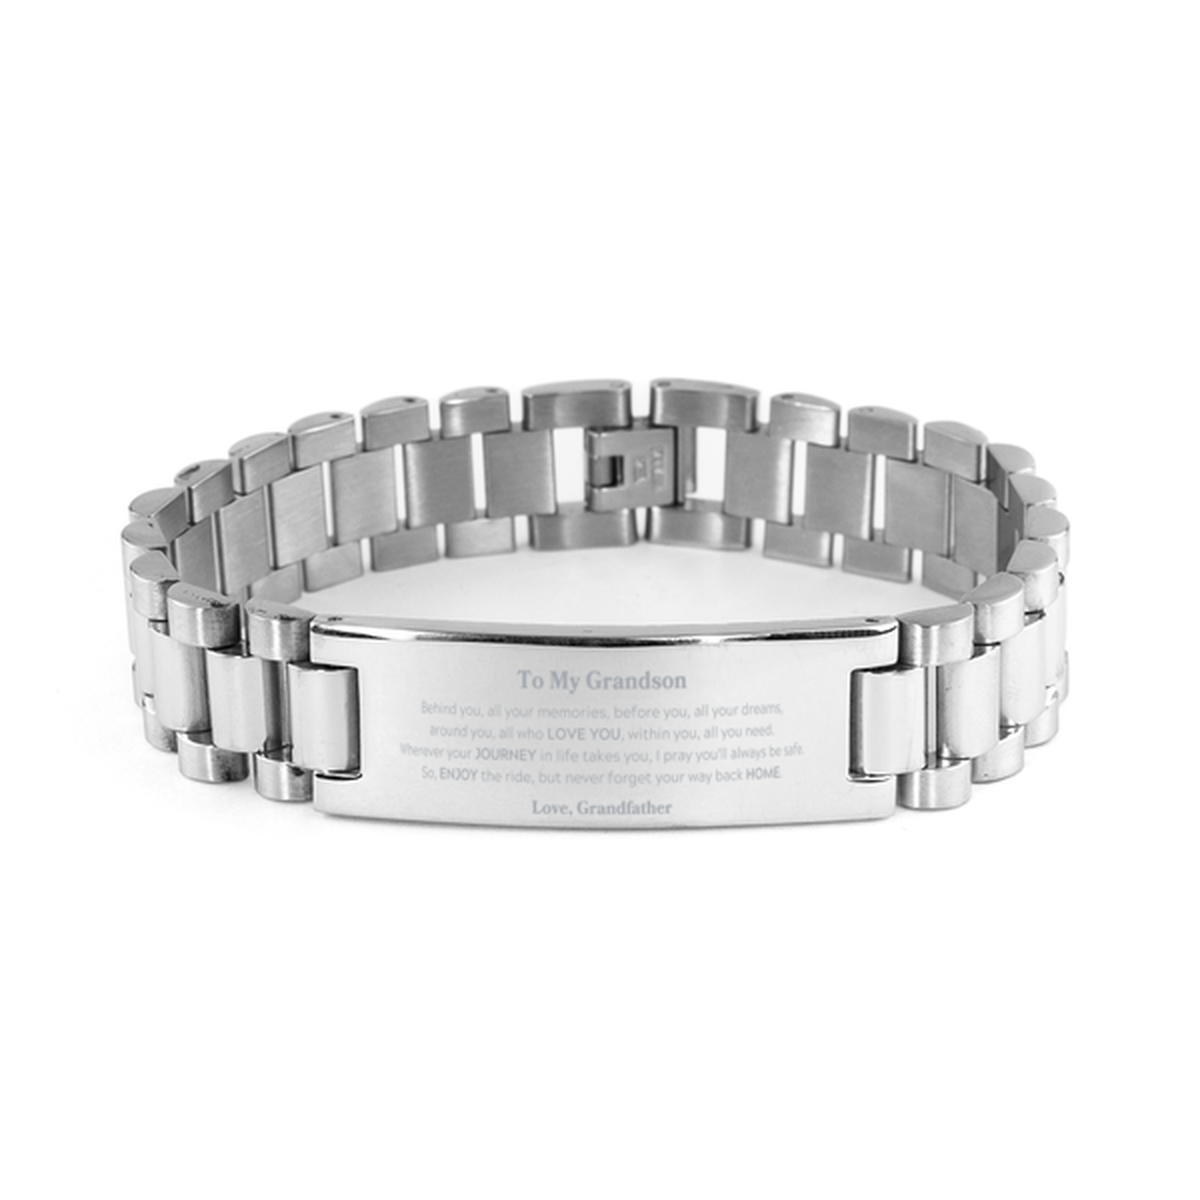 To My Grandson Graduation Gifts from Grandfather, Grandson Ladder Stainless Steel Bracelet Christmas Birthday Gifts for Grandson Behind you, all your memories, before you, all your dreams. Love, Grandfather